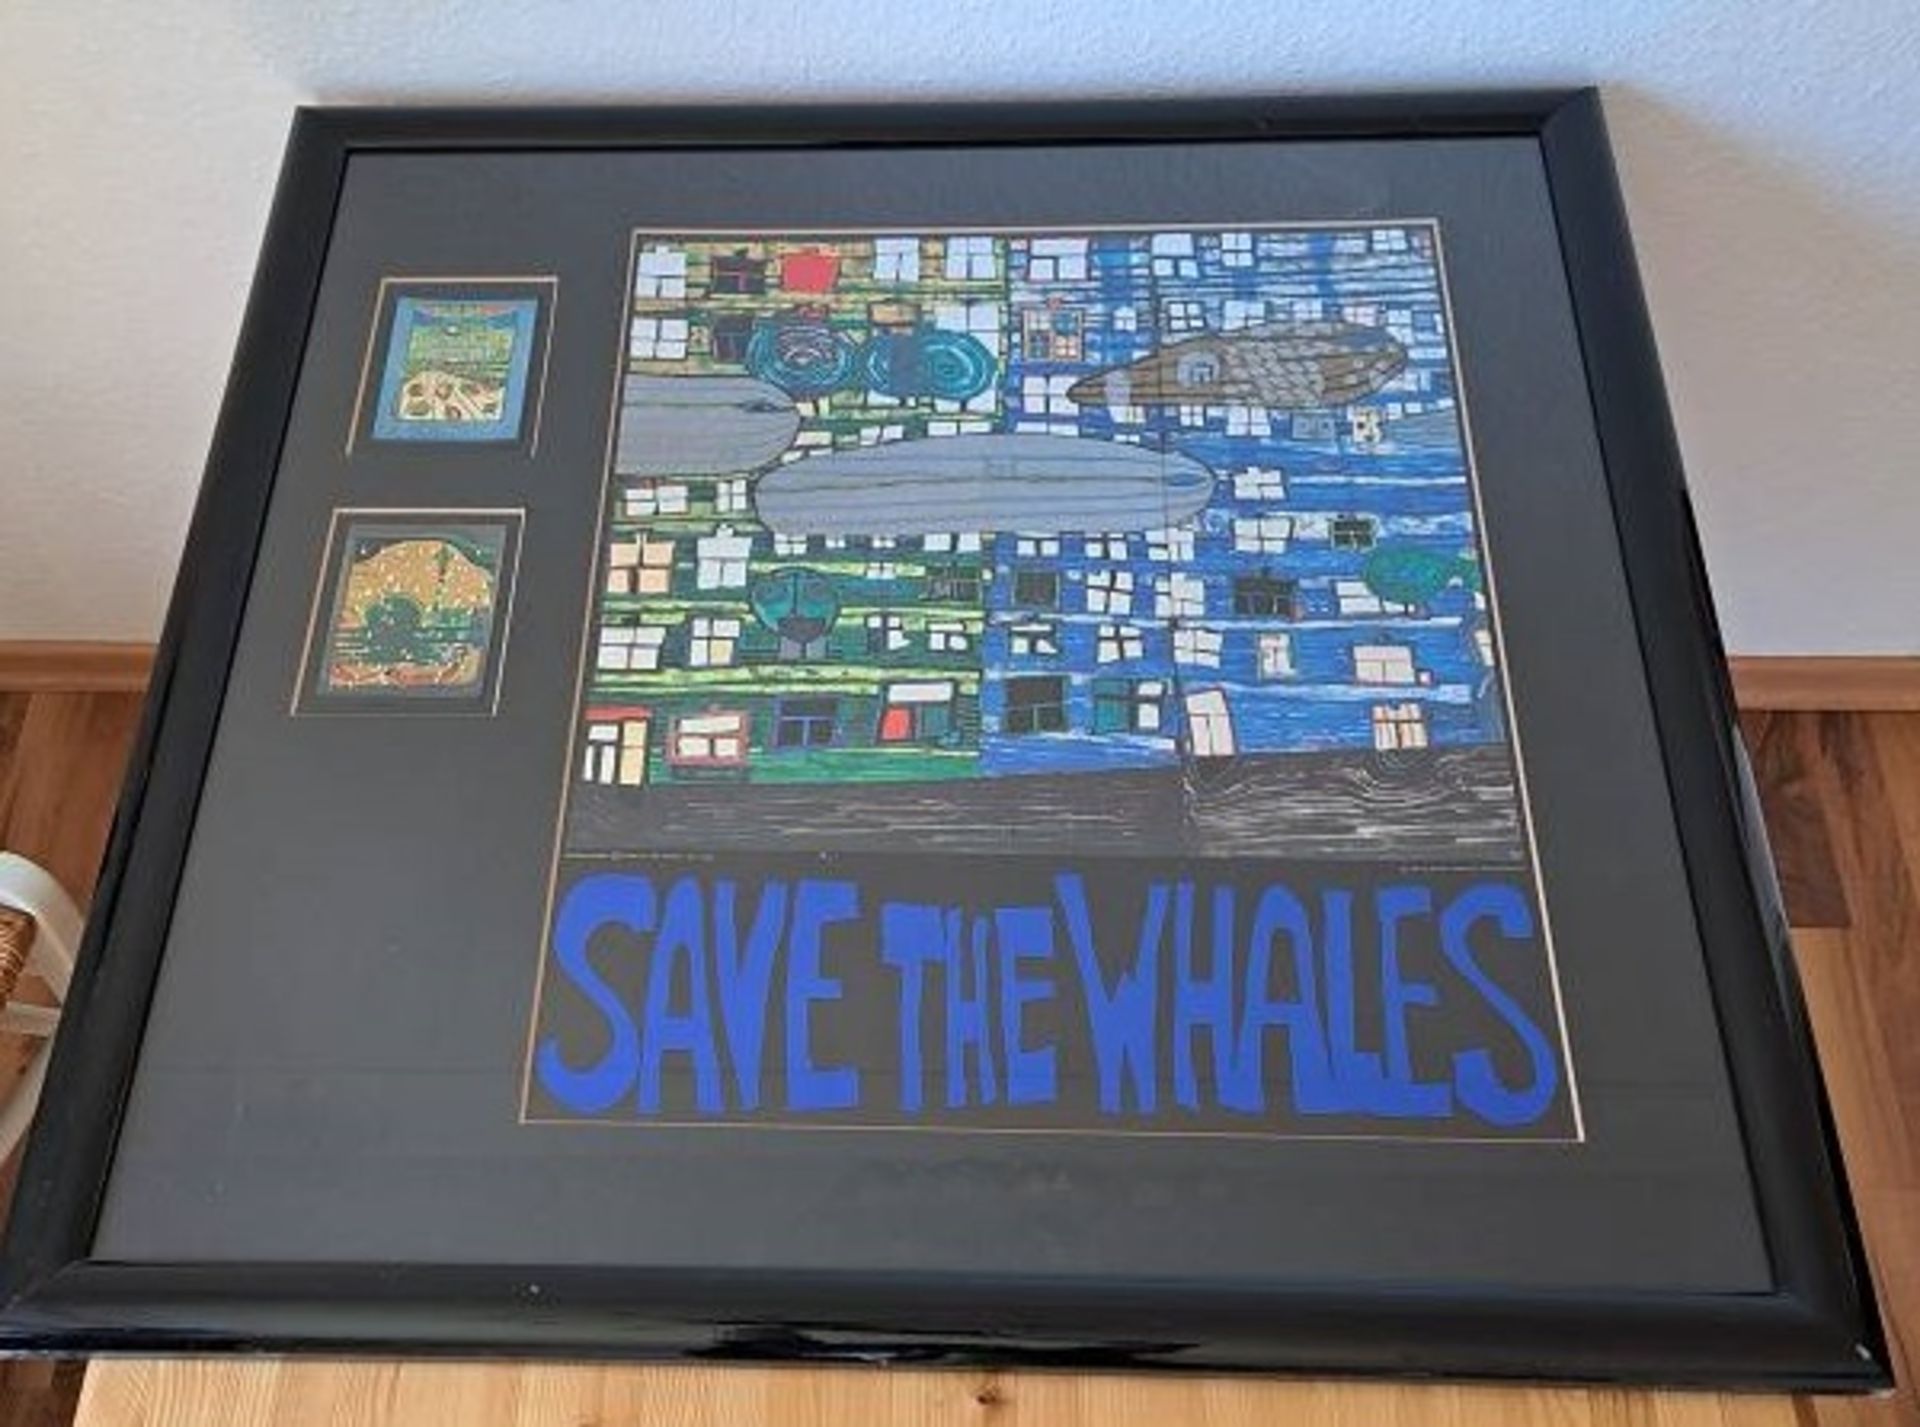 Hundertwasser "Save the Whales" - Image 3 of 6